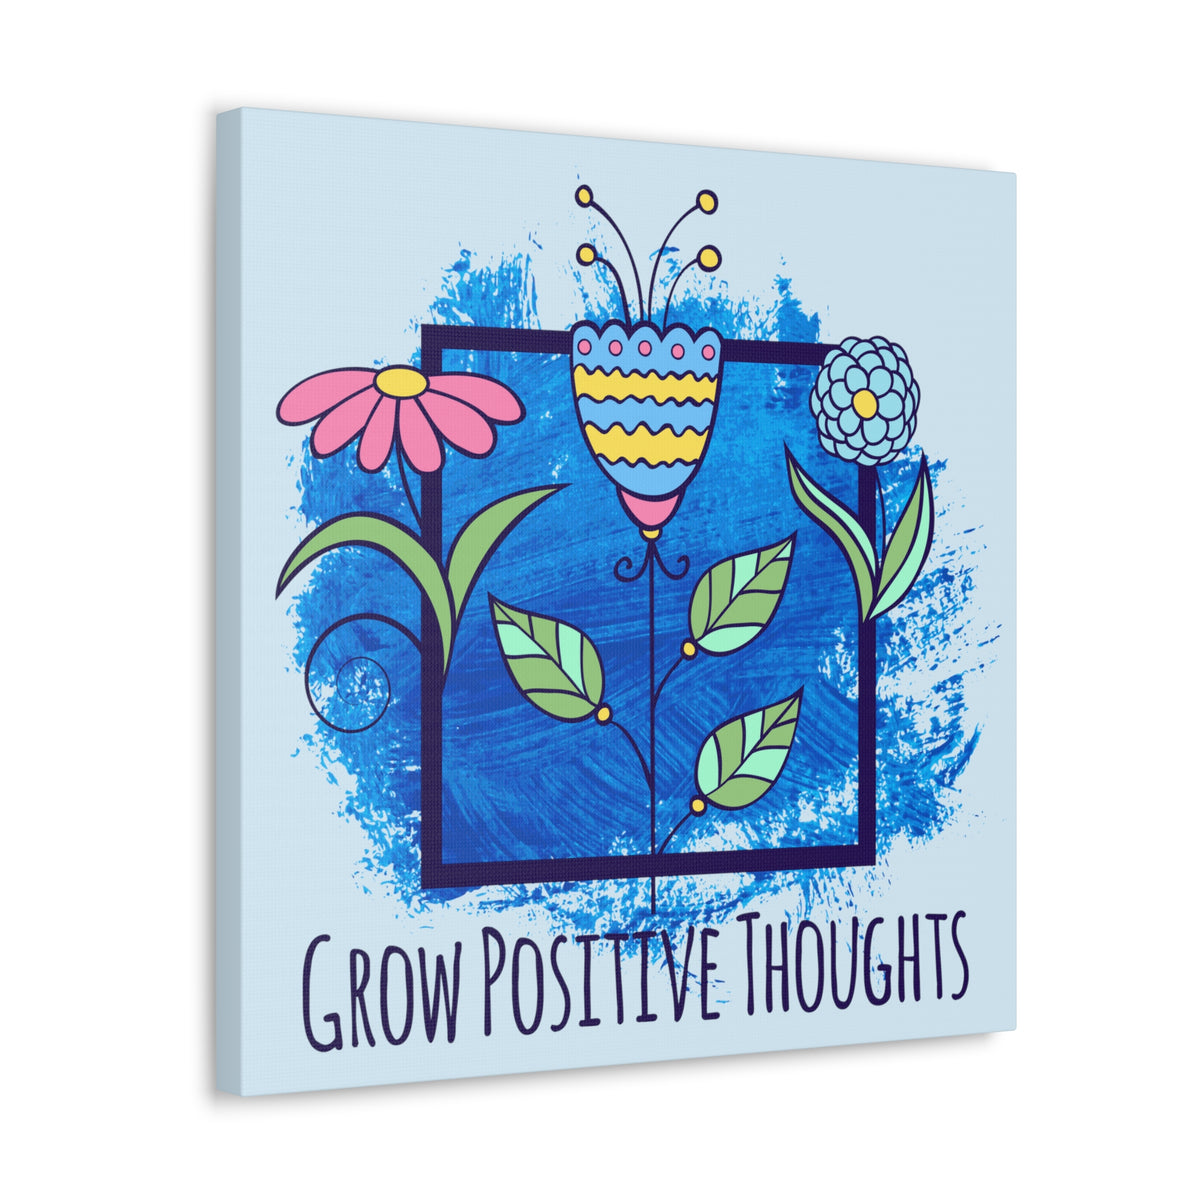 Positive Thoughts School Psychologist Wall Art | Mindfulness Psychology Gift  | Canvas Gallery Wraps Home Decor